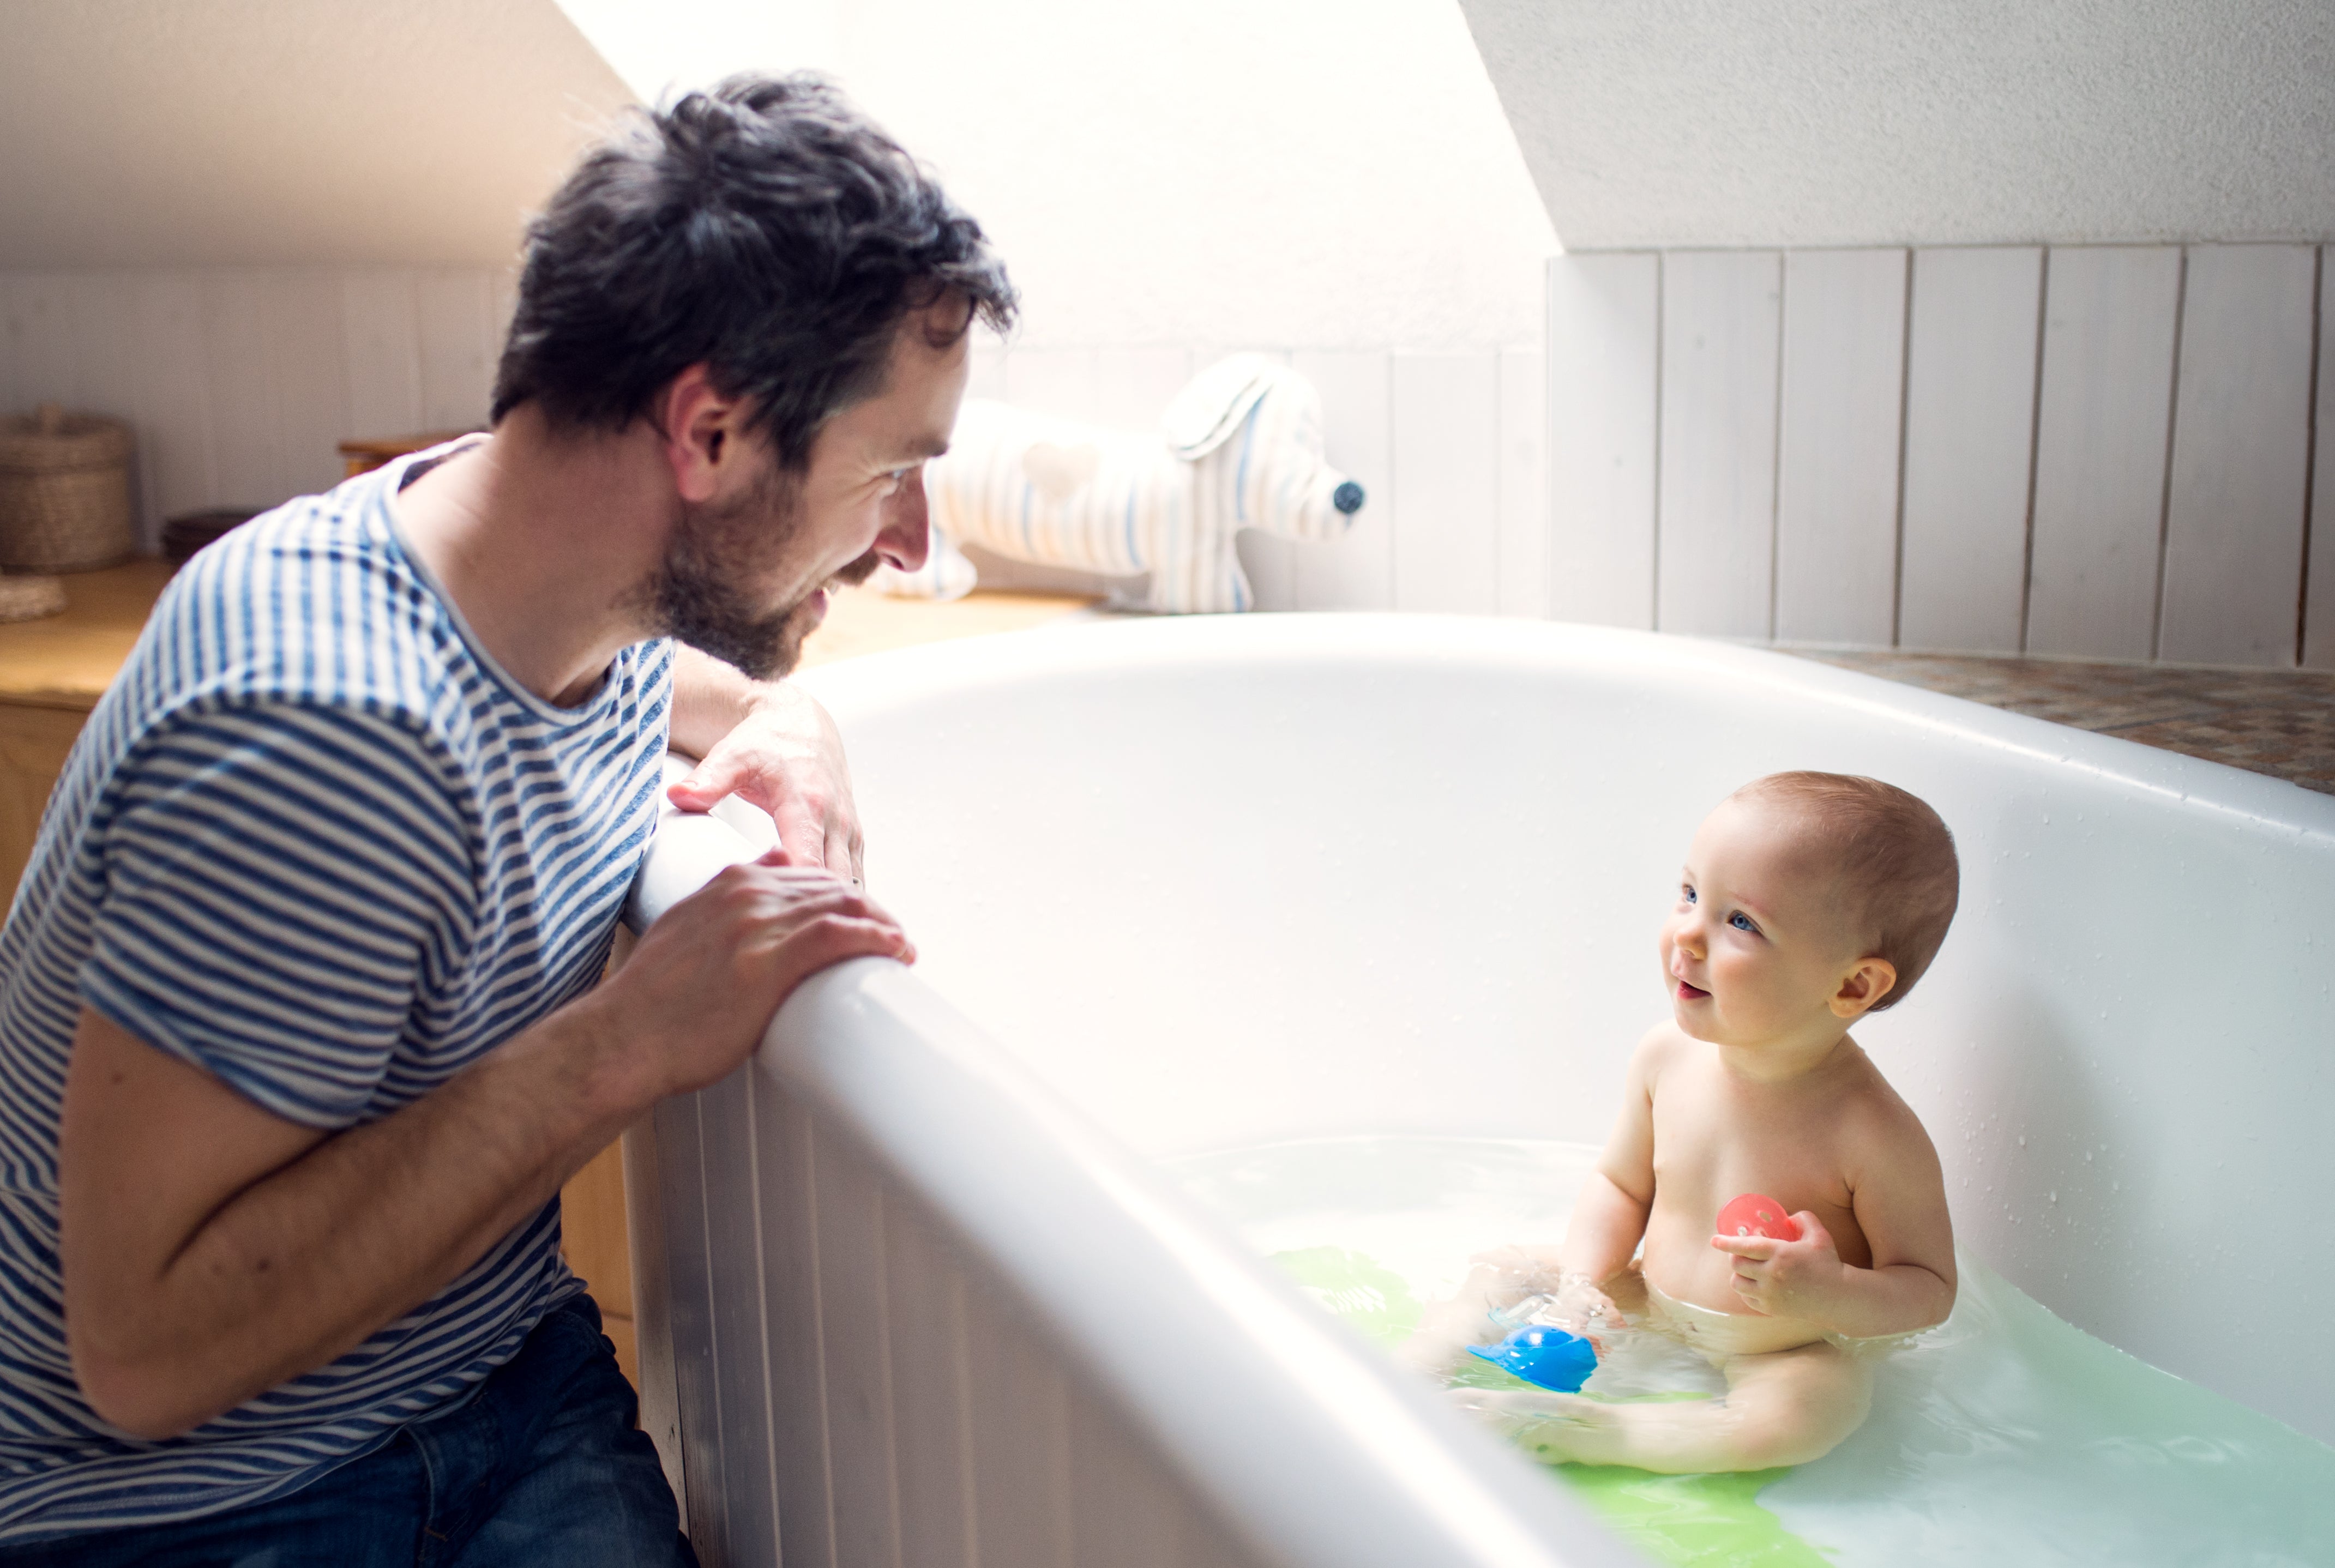 Toddler Bath Time: How to Make It Fun and Simple